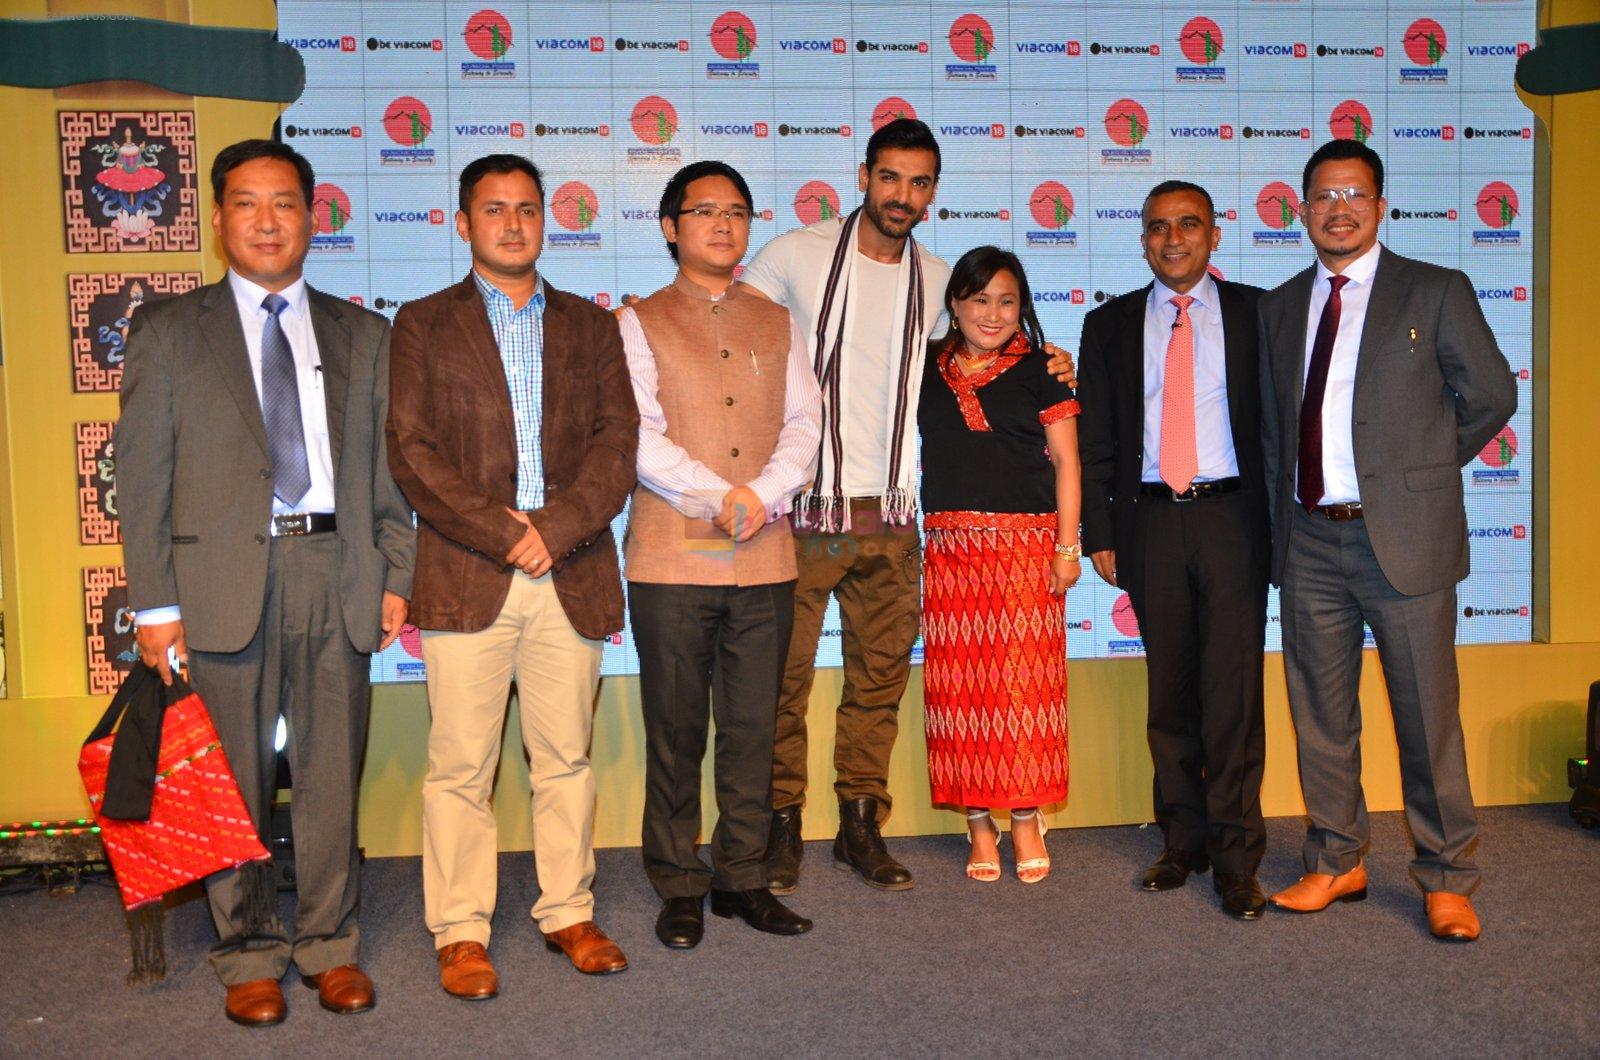 John Abraham during a tourism program for the North East Indian state of Arunachal Pradesh in Mumbai on 6th Sept 2016